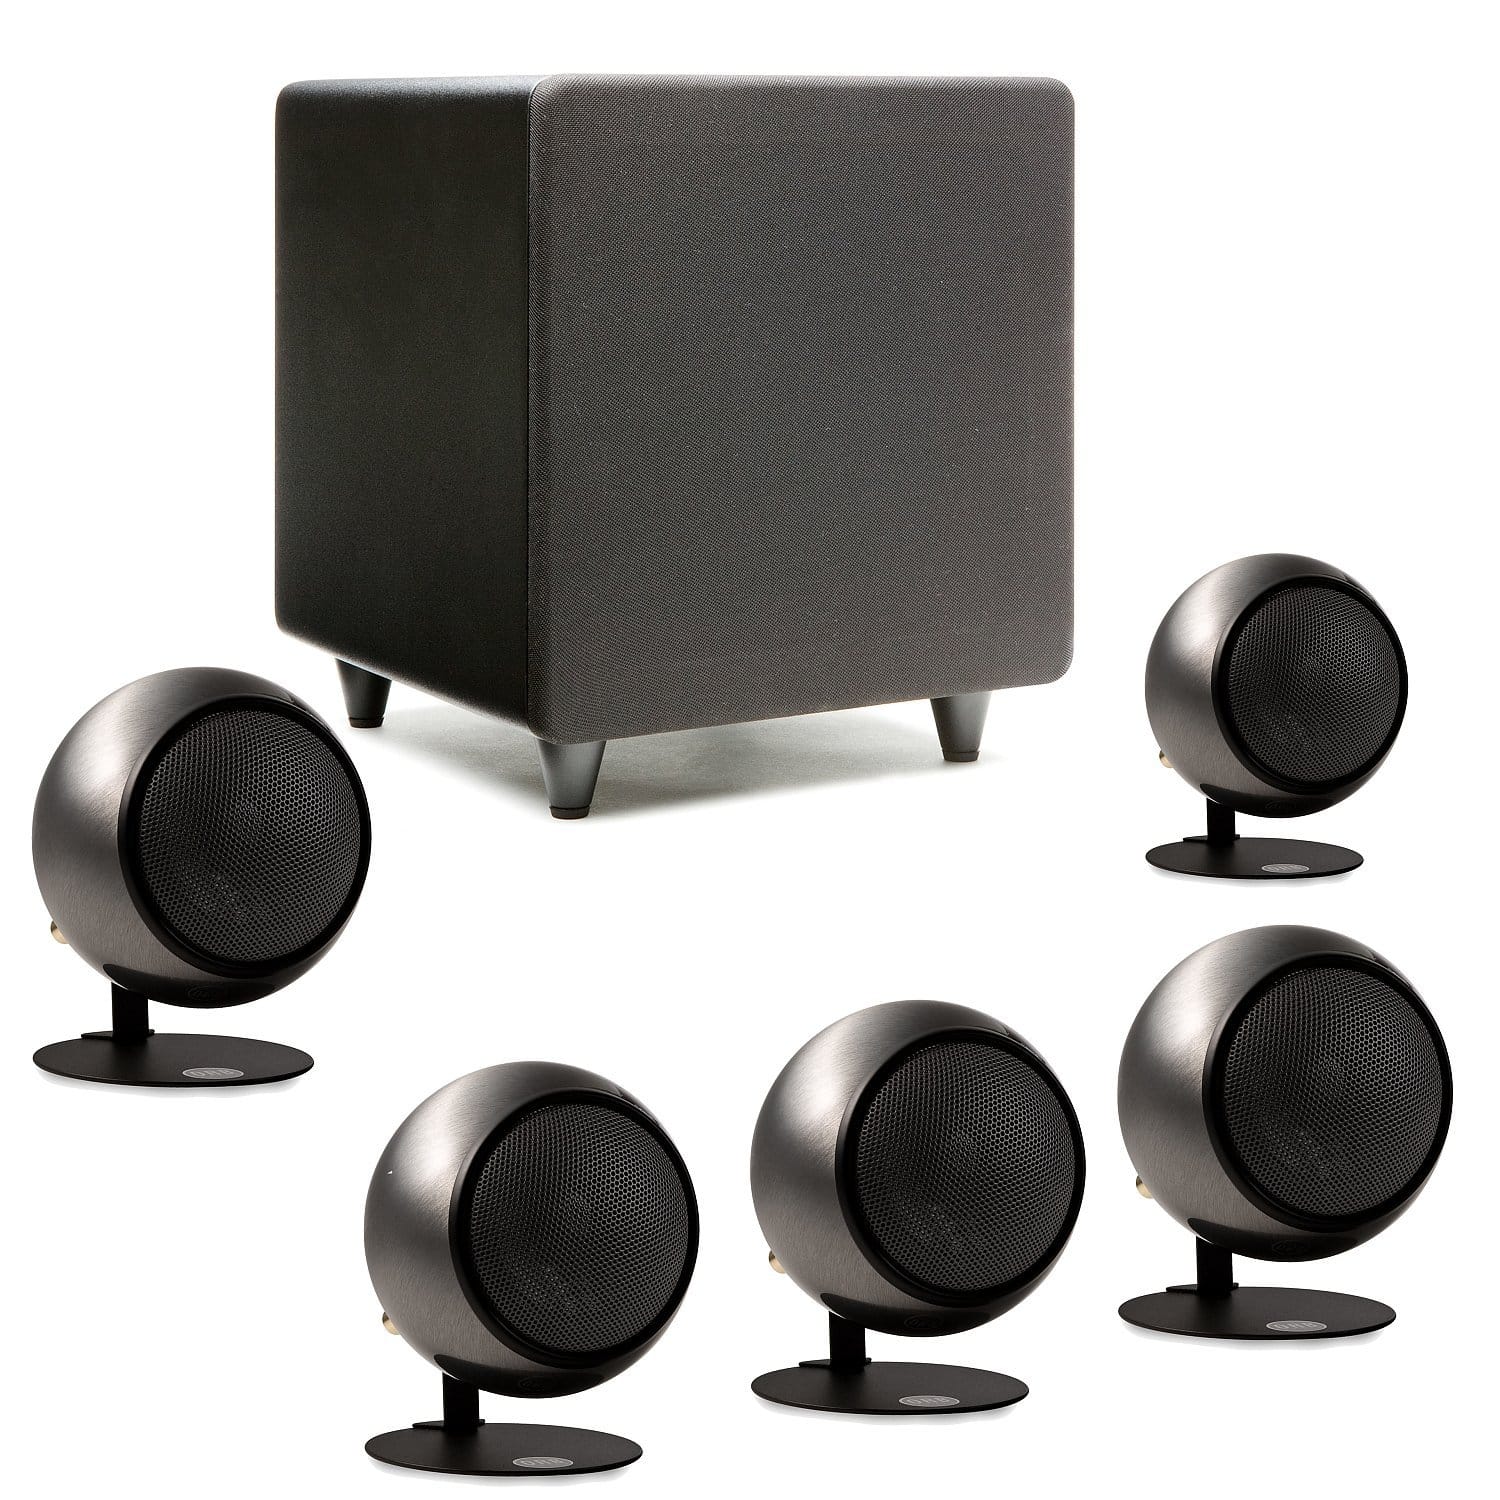 3. Orb Audio Mini 5.1 Home Theater Speaker System In Hand Polished Steel 